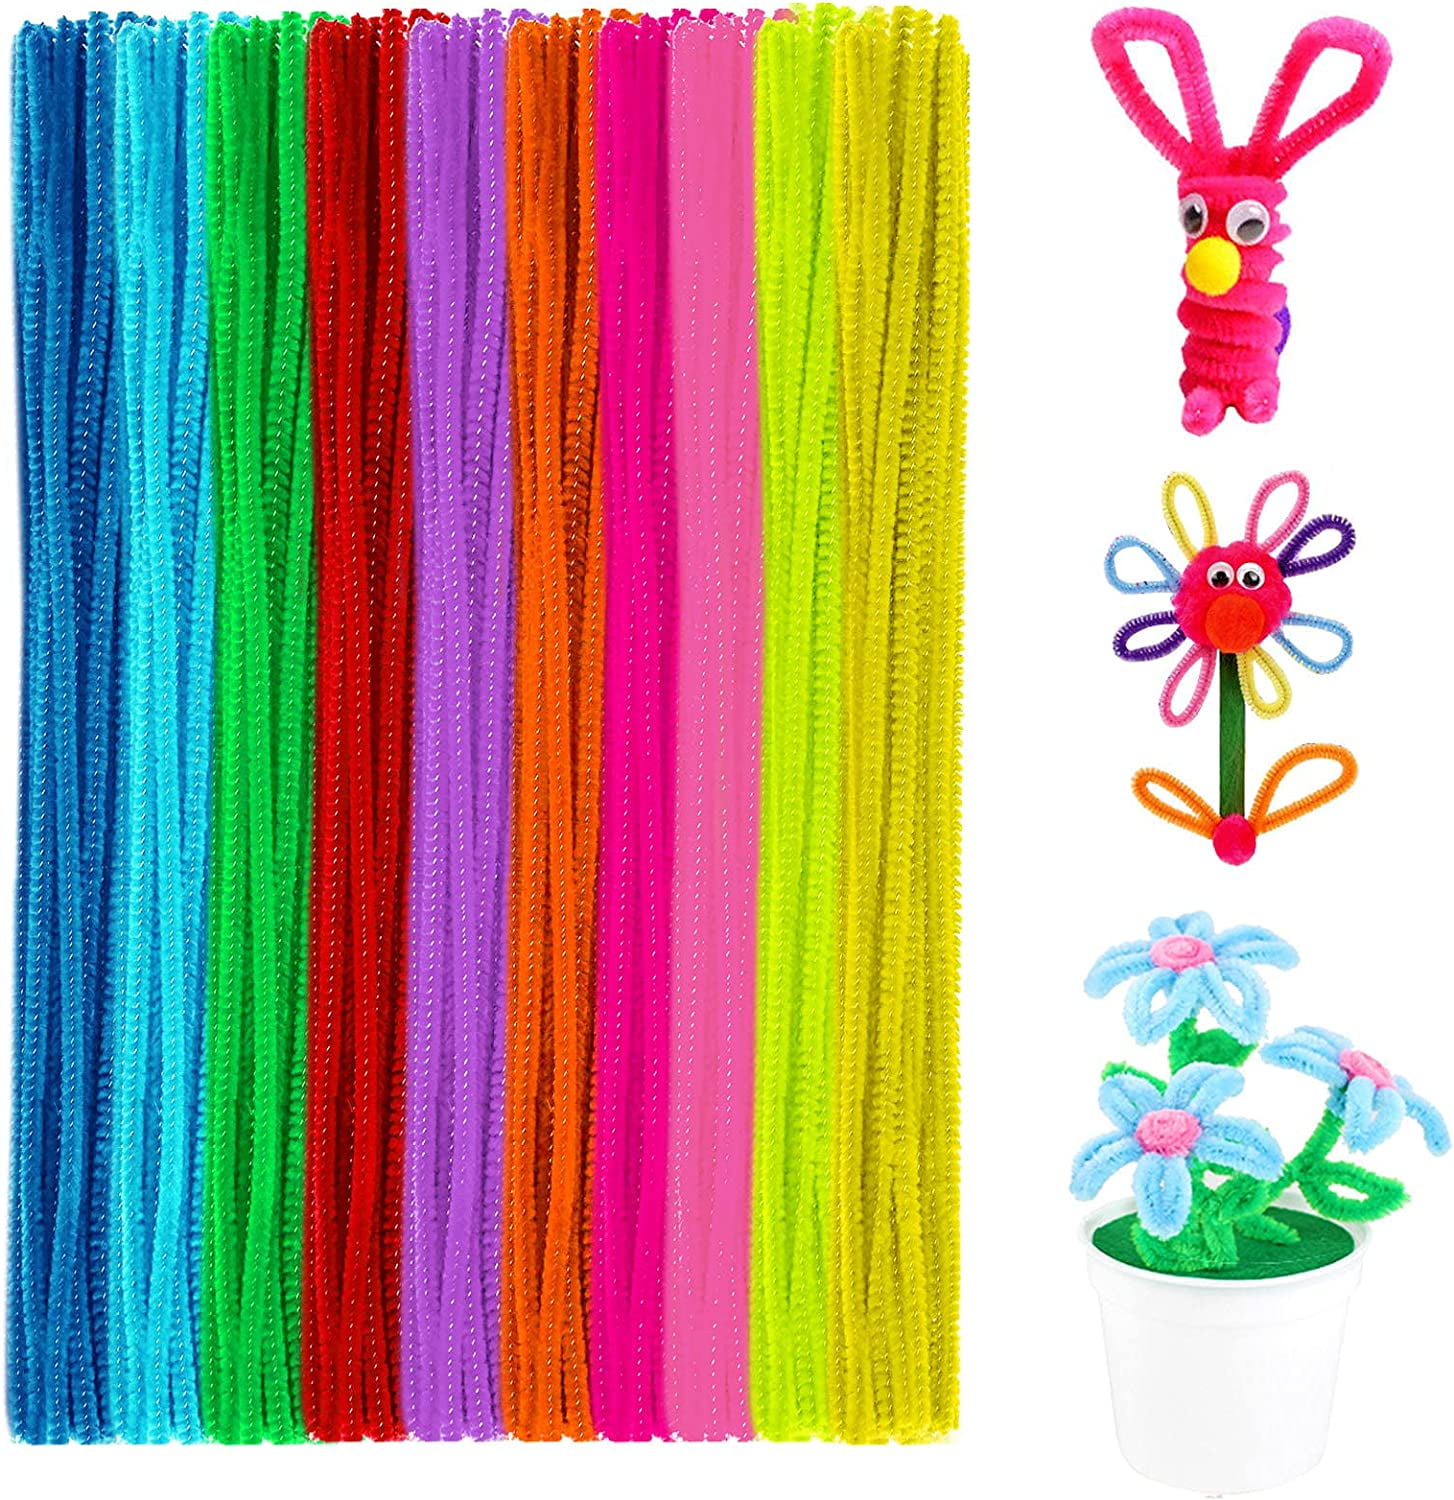 100Pcs Glitter Chenille Stems Pipe Cleaners Multicolor Chenille Cleaners  DIY Craft Projects DIY Kids Fuzzy Sticks